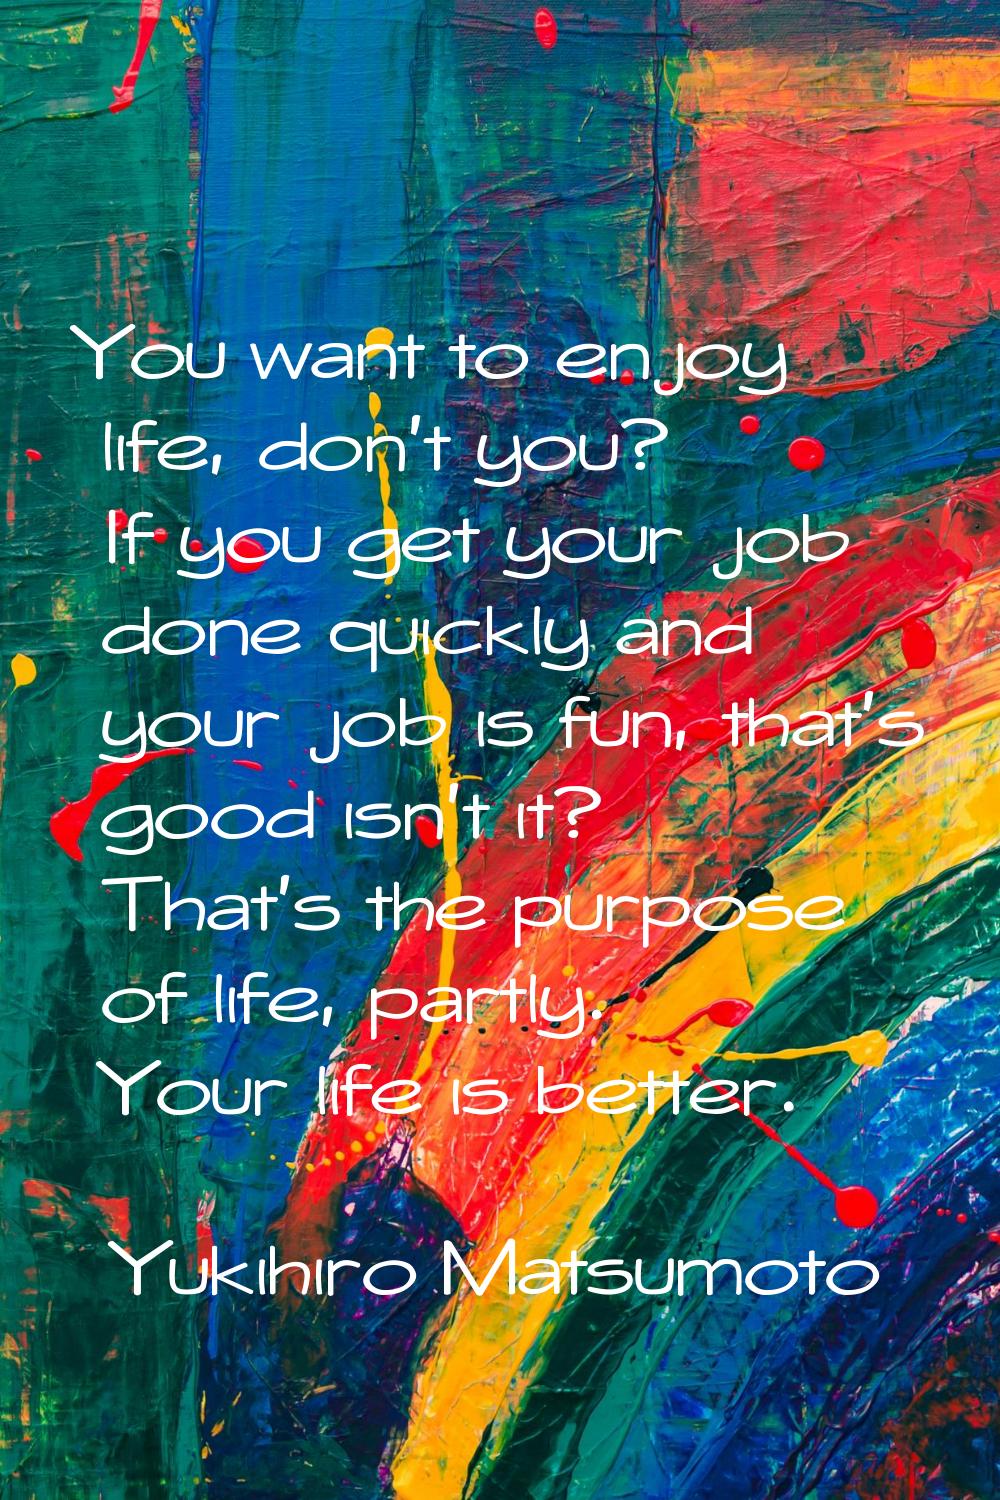 You want to enjoy life, don't you? If you get your job done quickly and your job is fun, that's goo